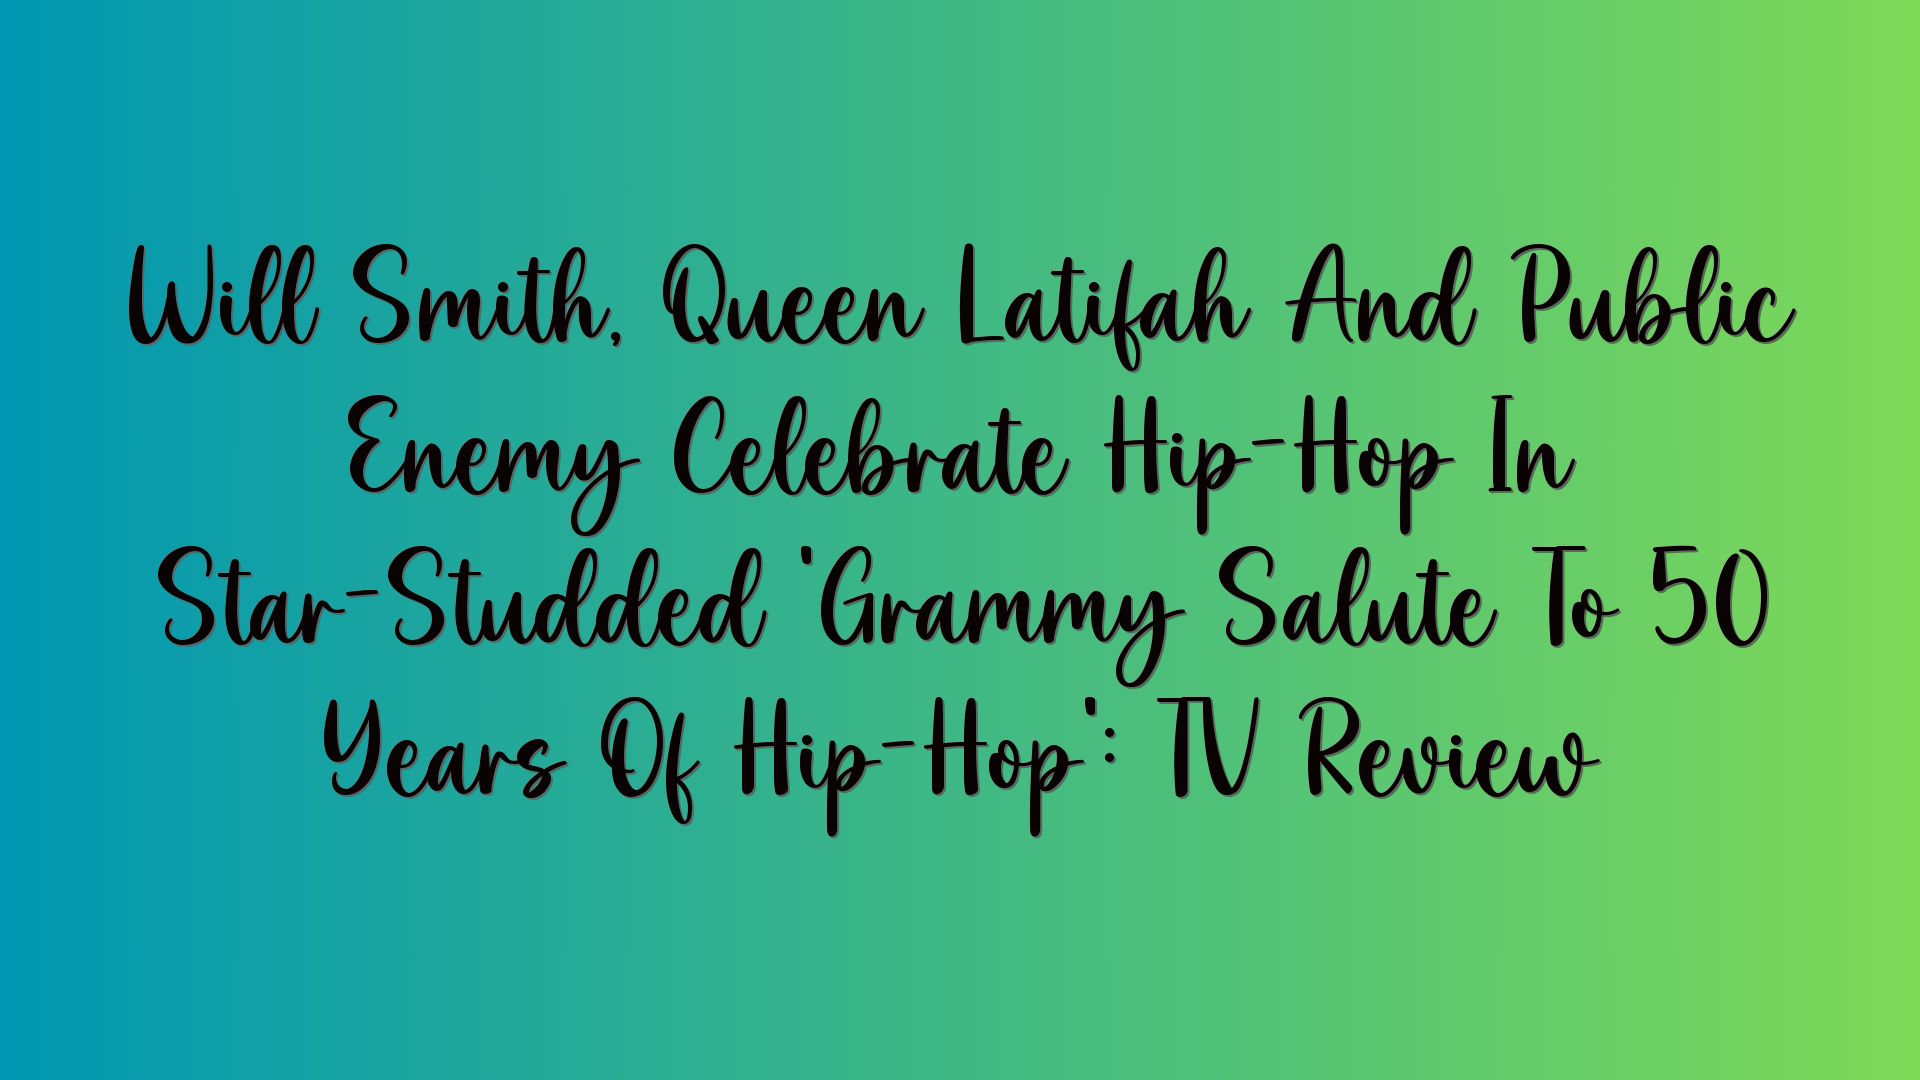 Will Smith, Queen Latifah And Public Enemy Celebrate Hip-Hop In Star-Studded ‘Grammy Salute To 50 Years Of Hip-Hop’: TV Review